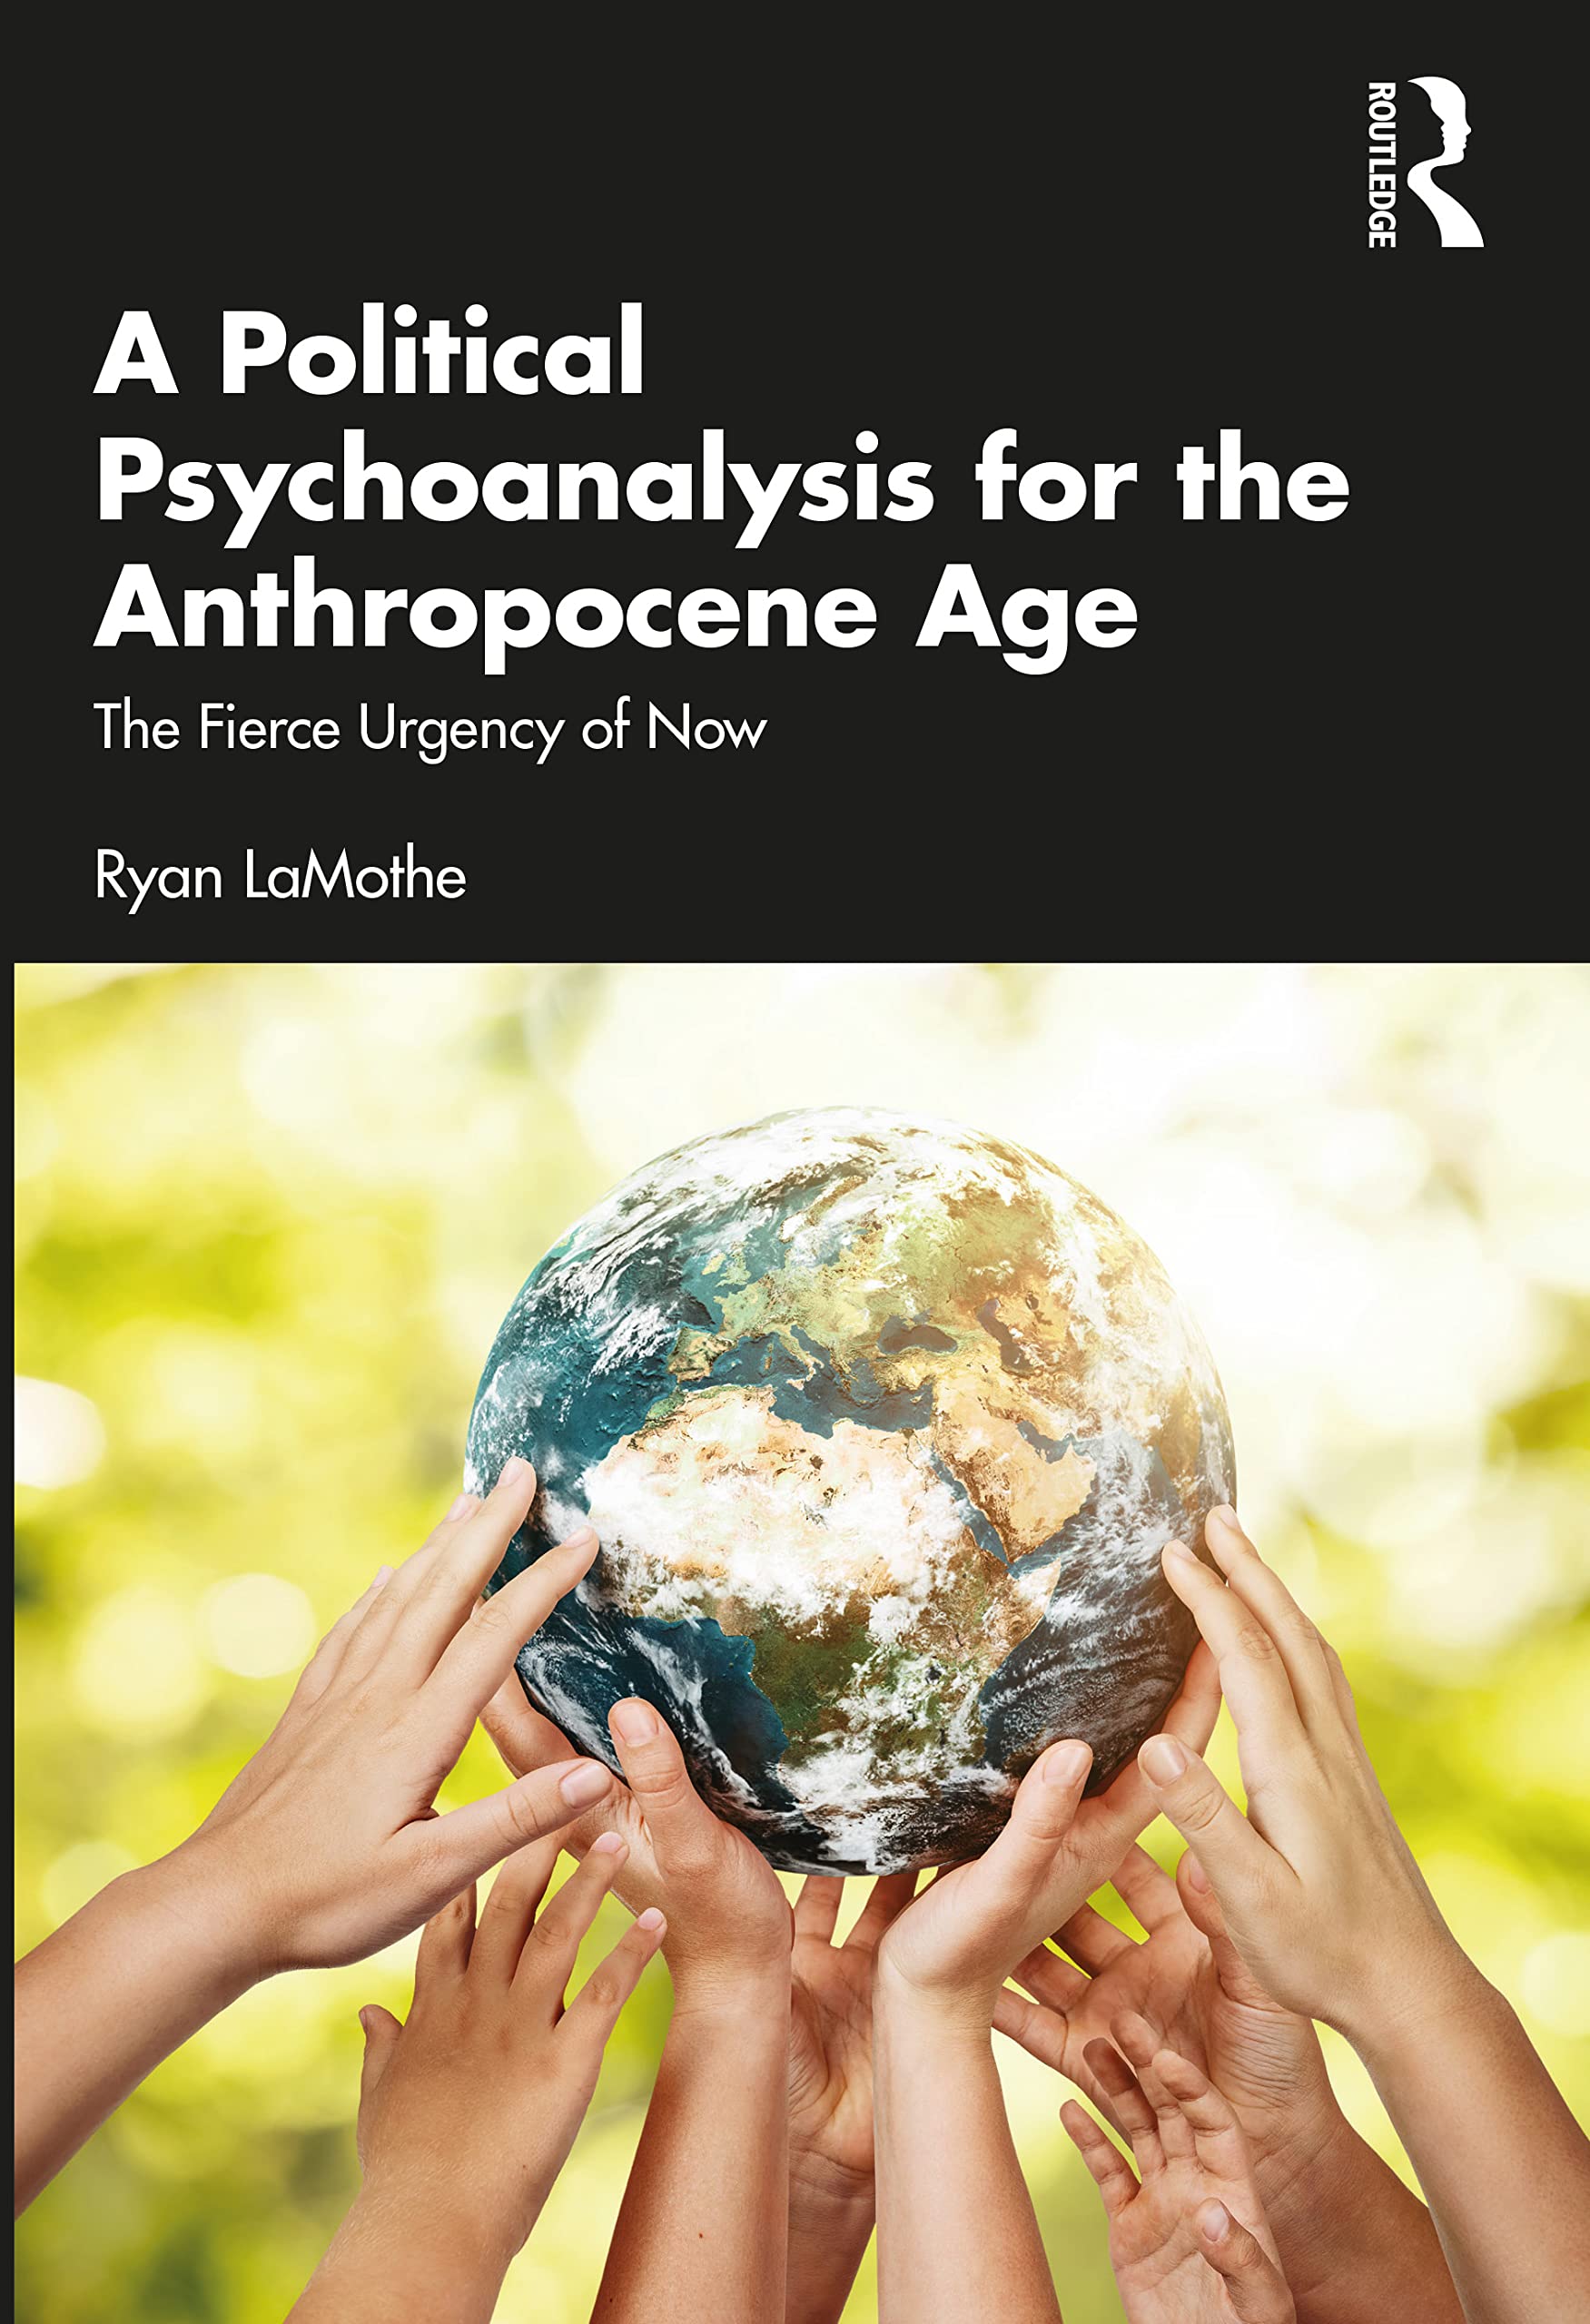 A Political Psychoanalysis for the Anthropocene Age: The Fierce Urgency of Now